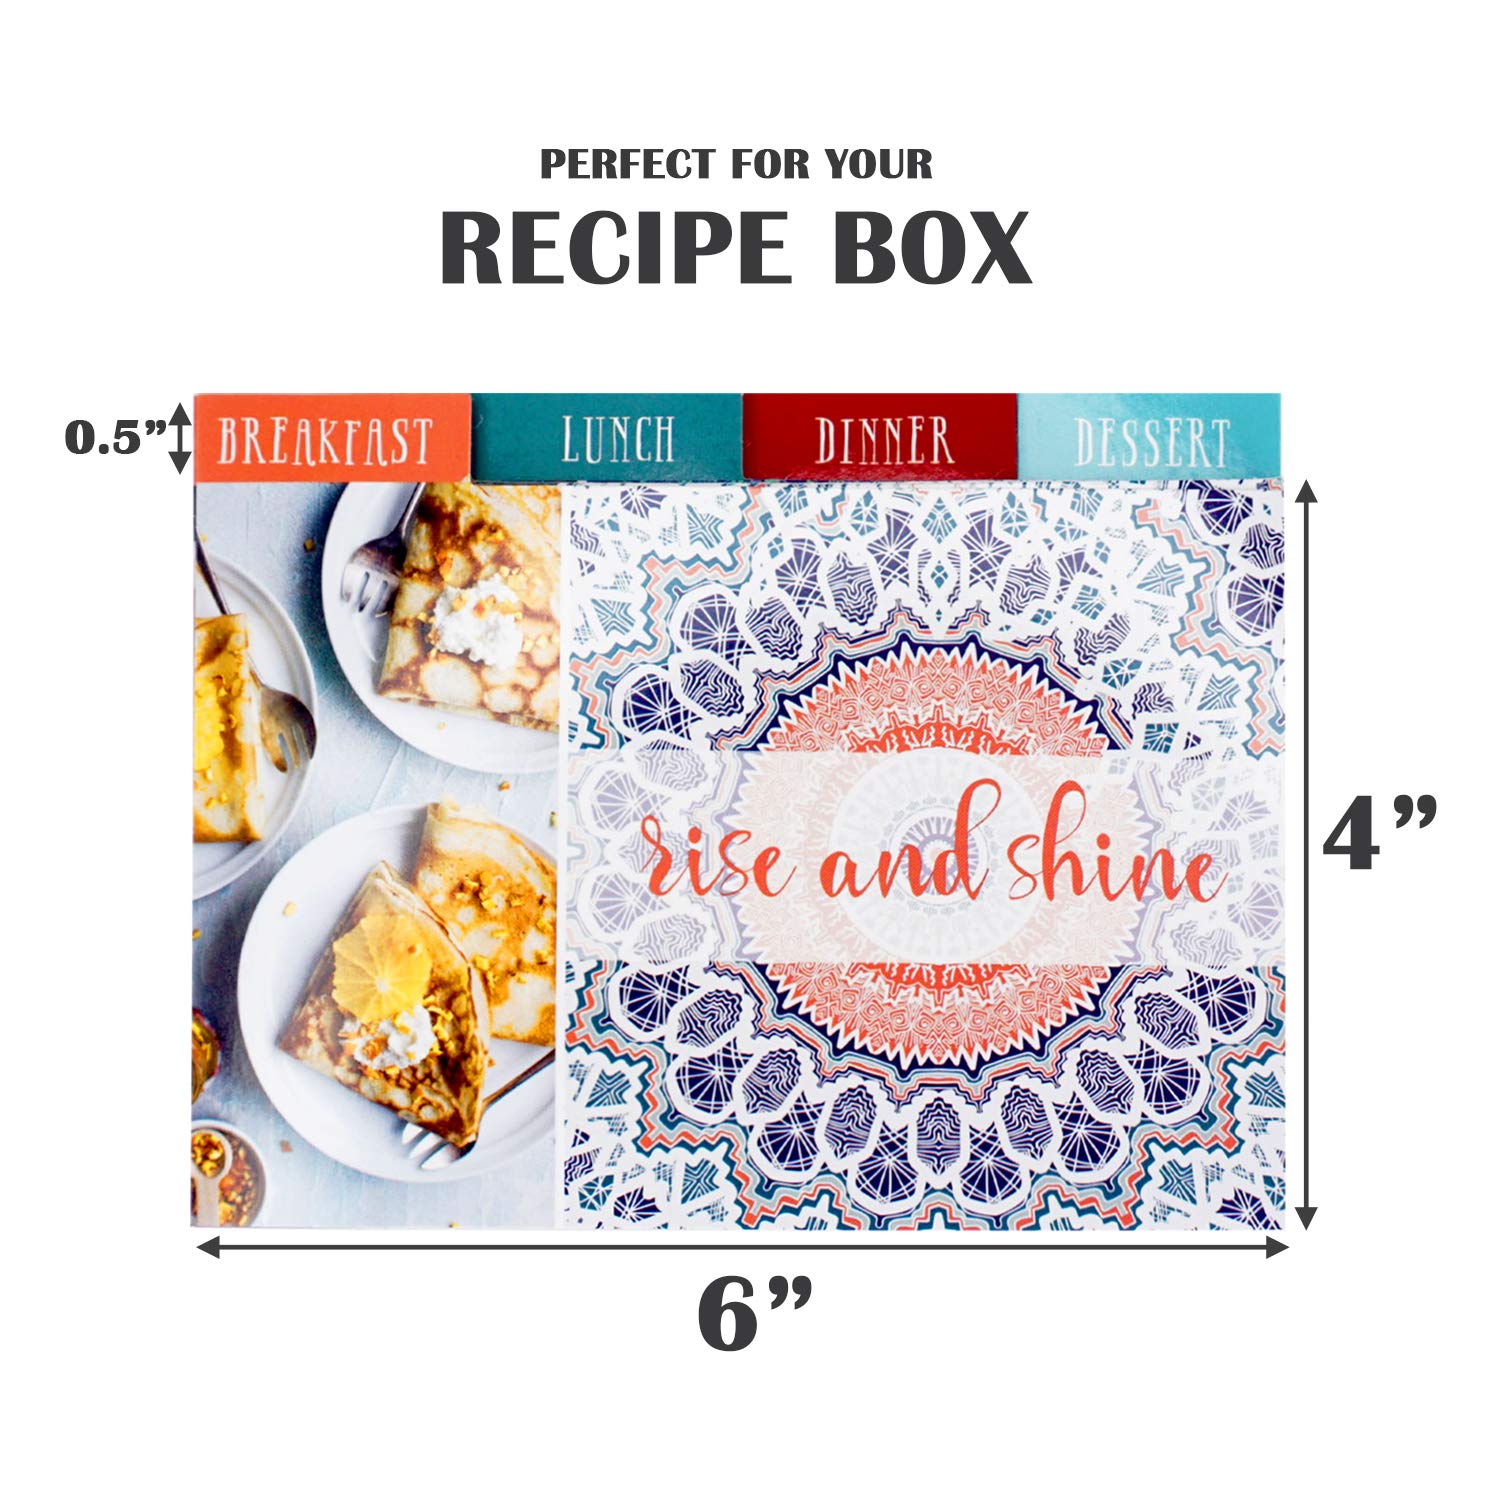 Ring Binder Depot, Recipe Cards 4 inch X 6 inch on Premium Thick Card Stock with Card Dividers Included! Great Gift for Amateurs or Experienced Chefs (Pack of 50)